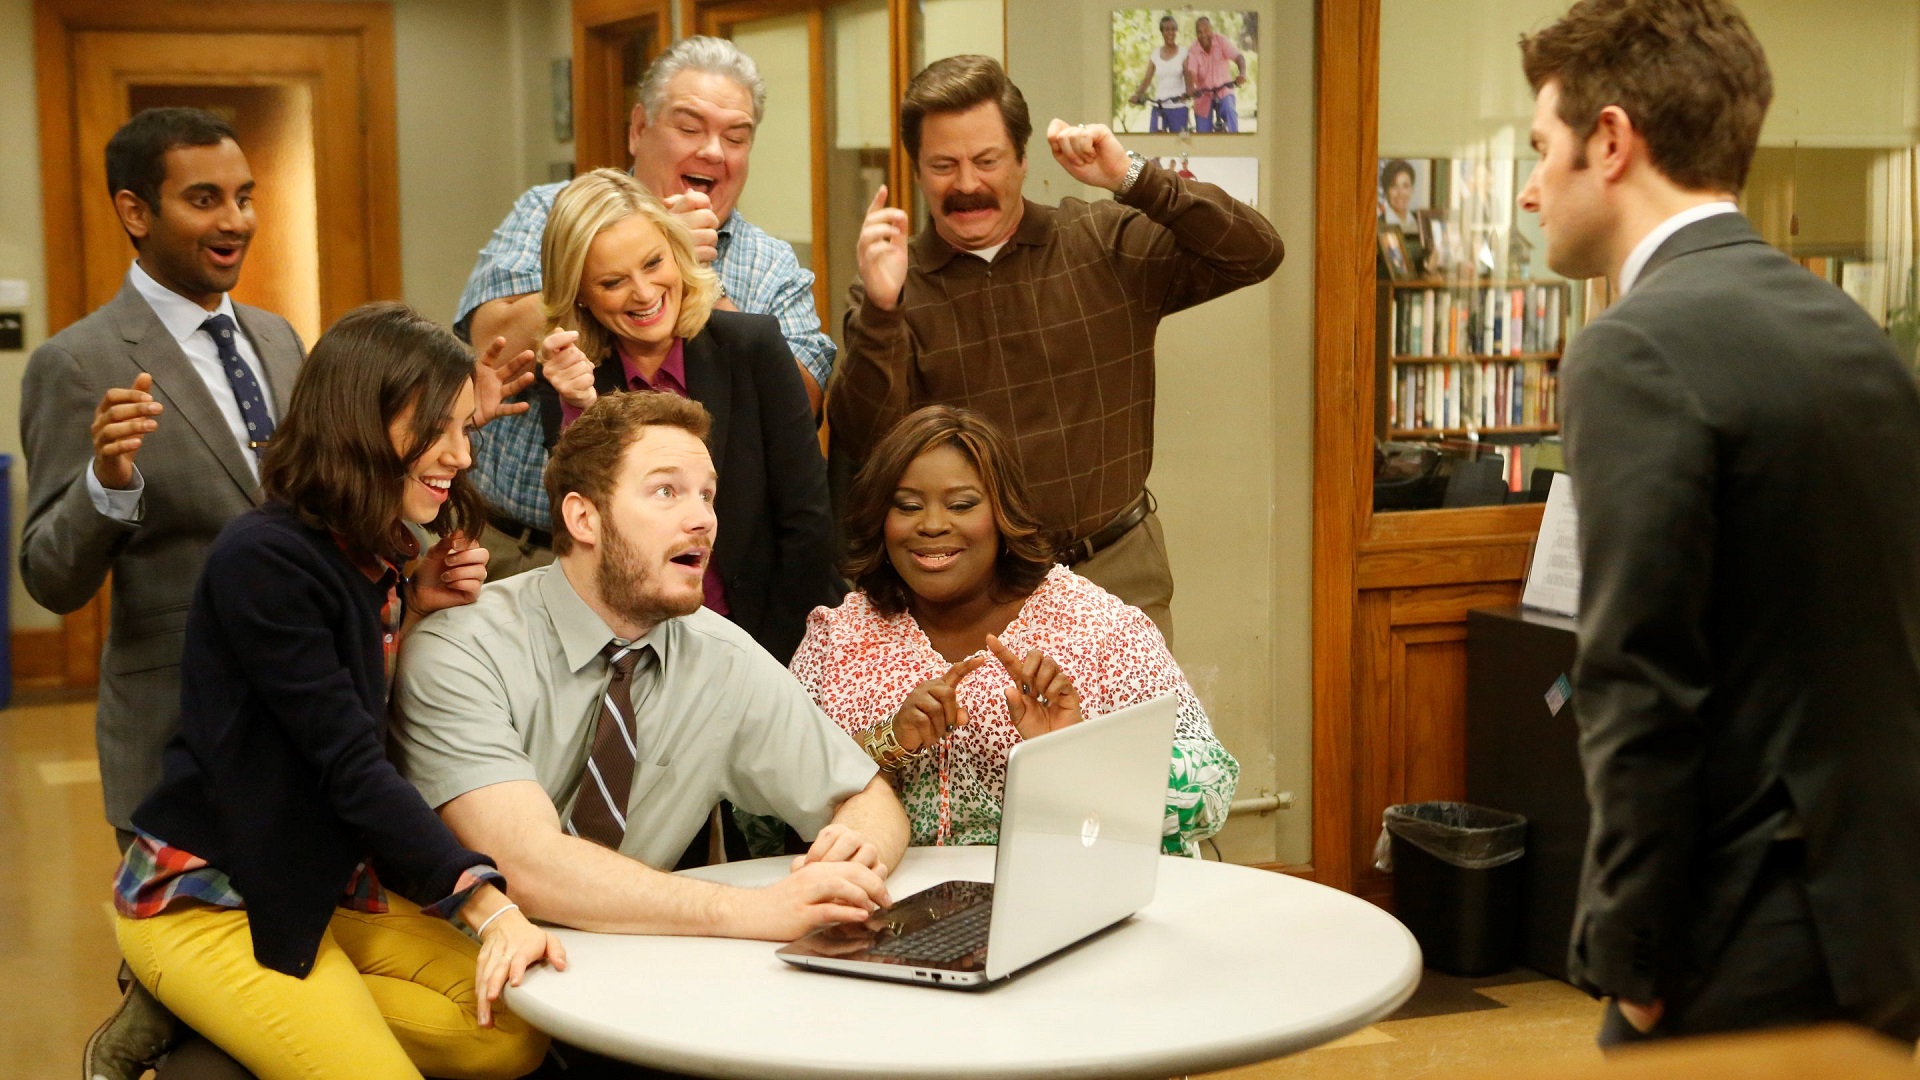 Parks and Recreation best comedy series on Amazon Prime Video